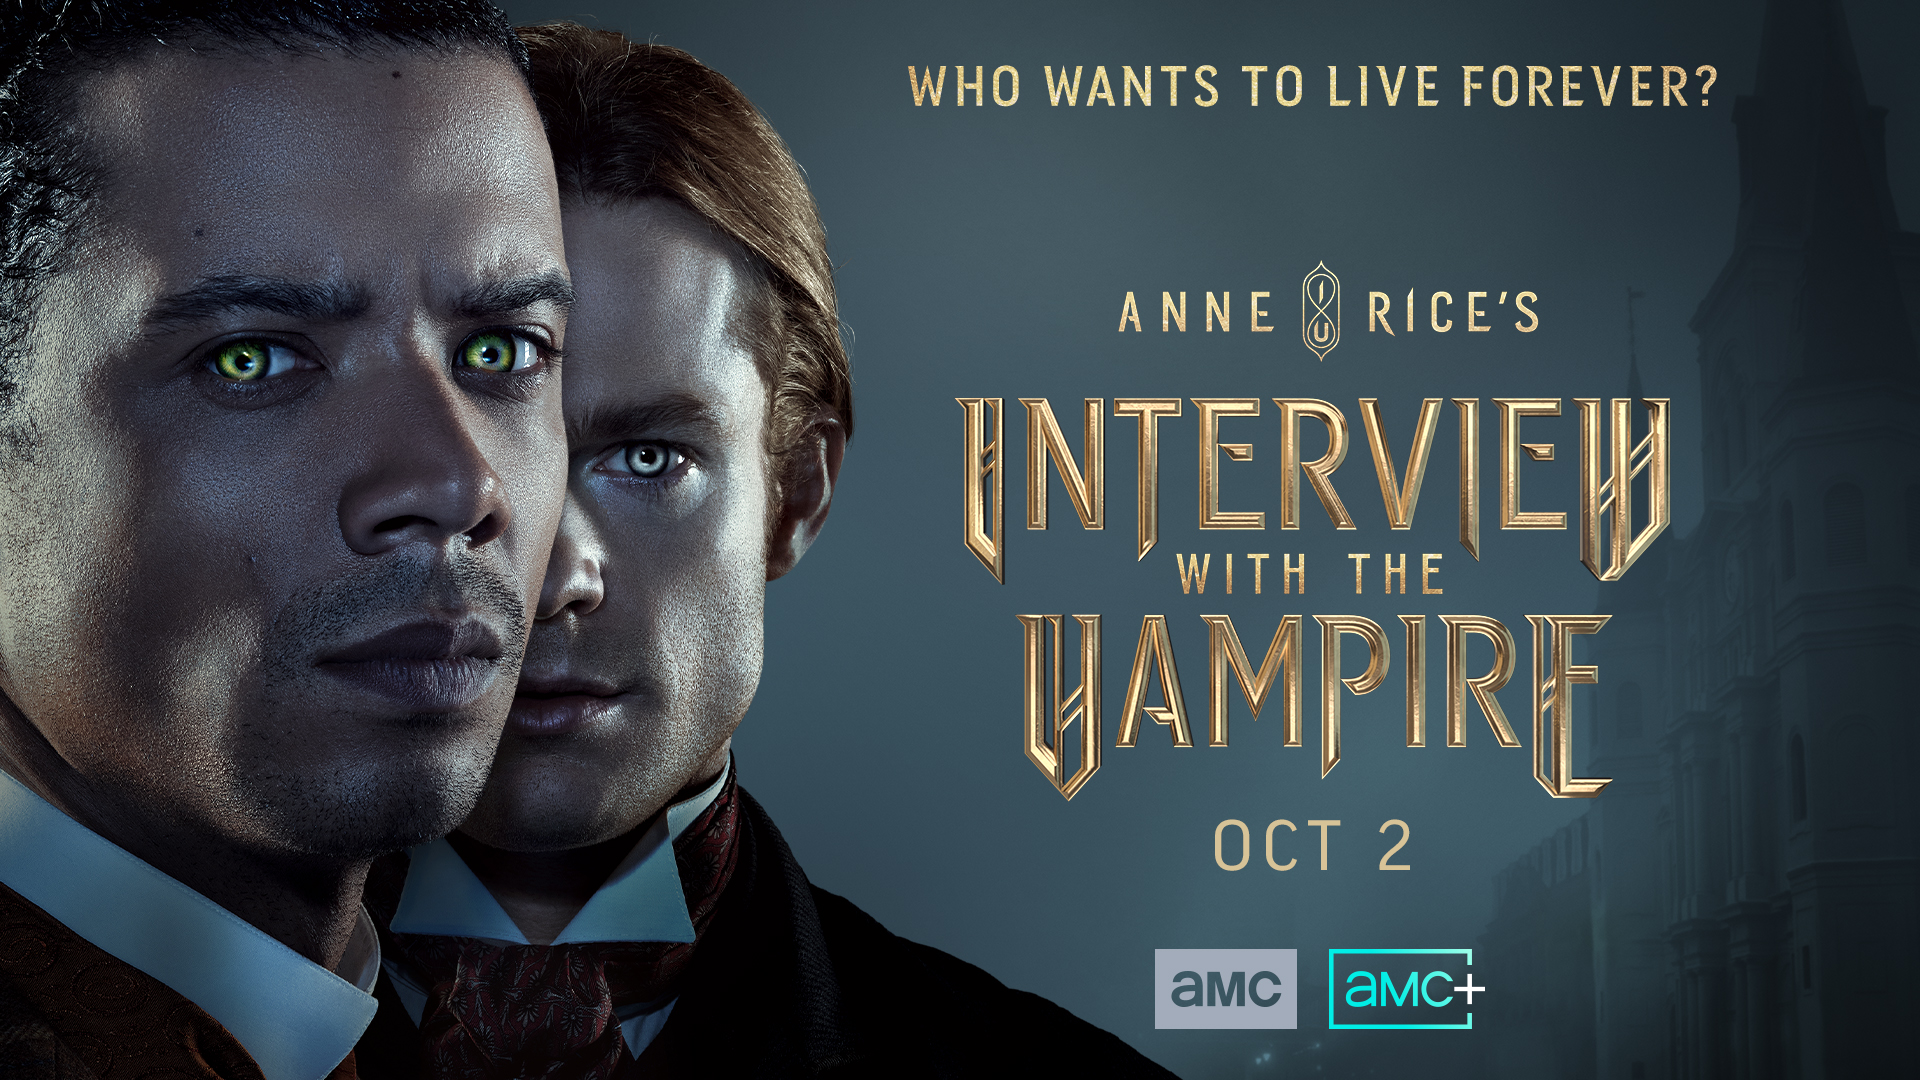 Anne Rice's Interview with the Vampire new trailer and key art AMC